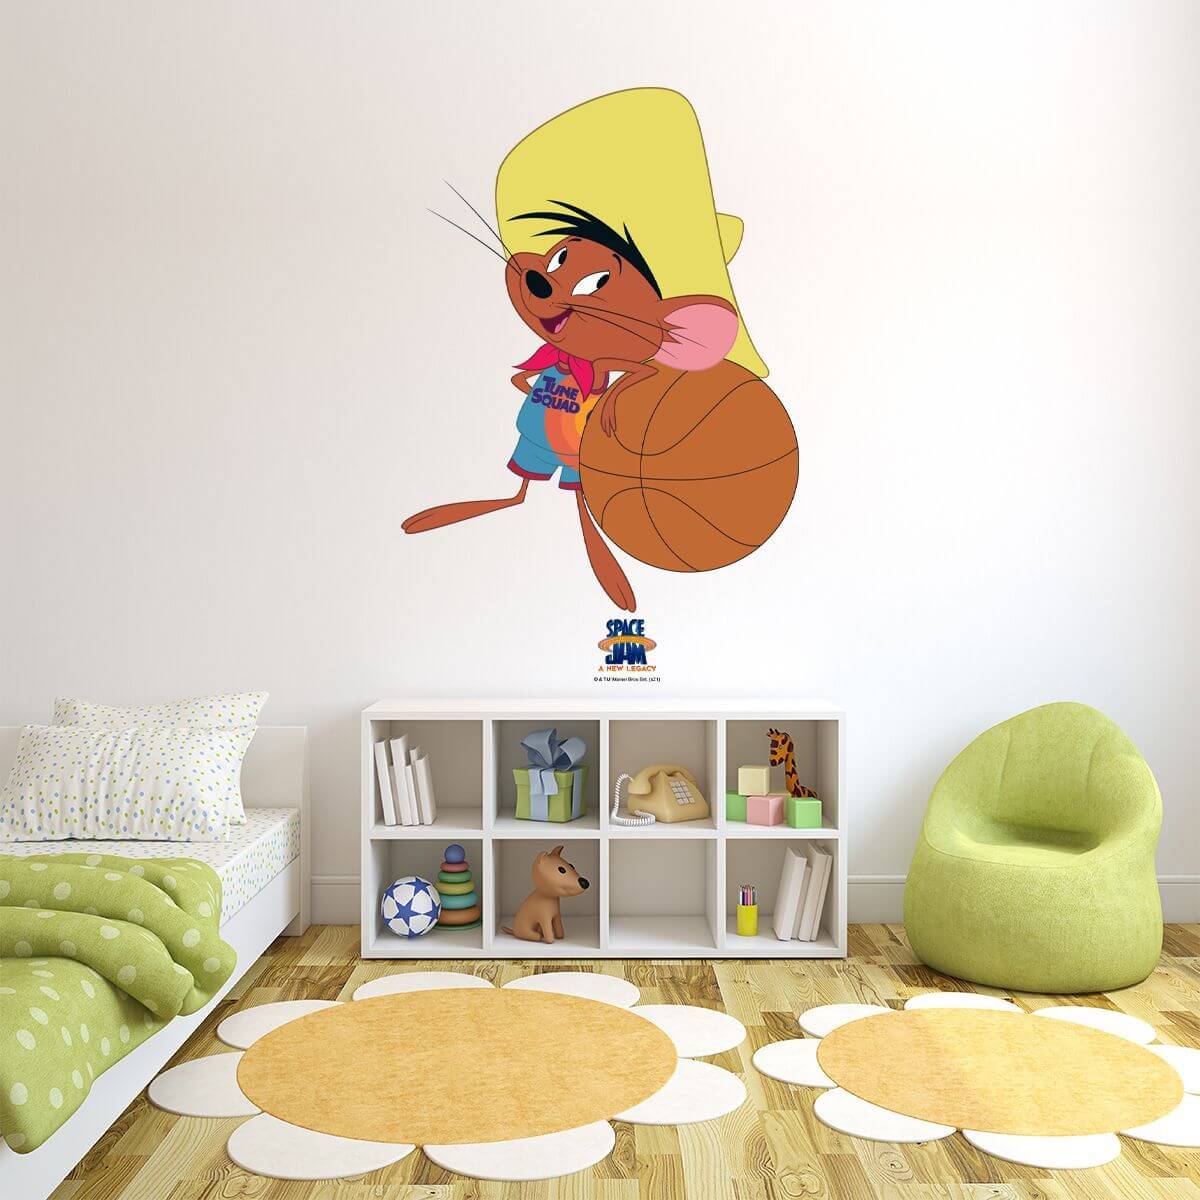 Kismet Decals Space Jam: A New Legacy Speedy Gonzales Licensed Wall Sticker - Easy DIY Looney Tunes Home & Room Decor - Kismet Decals